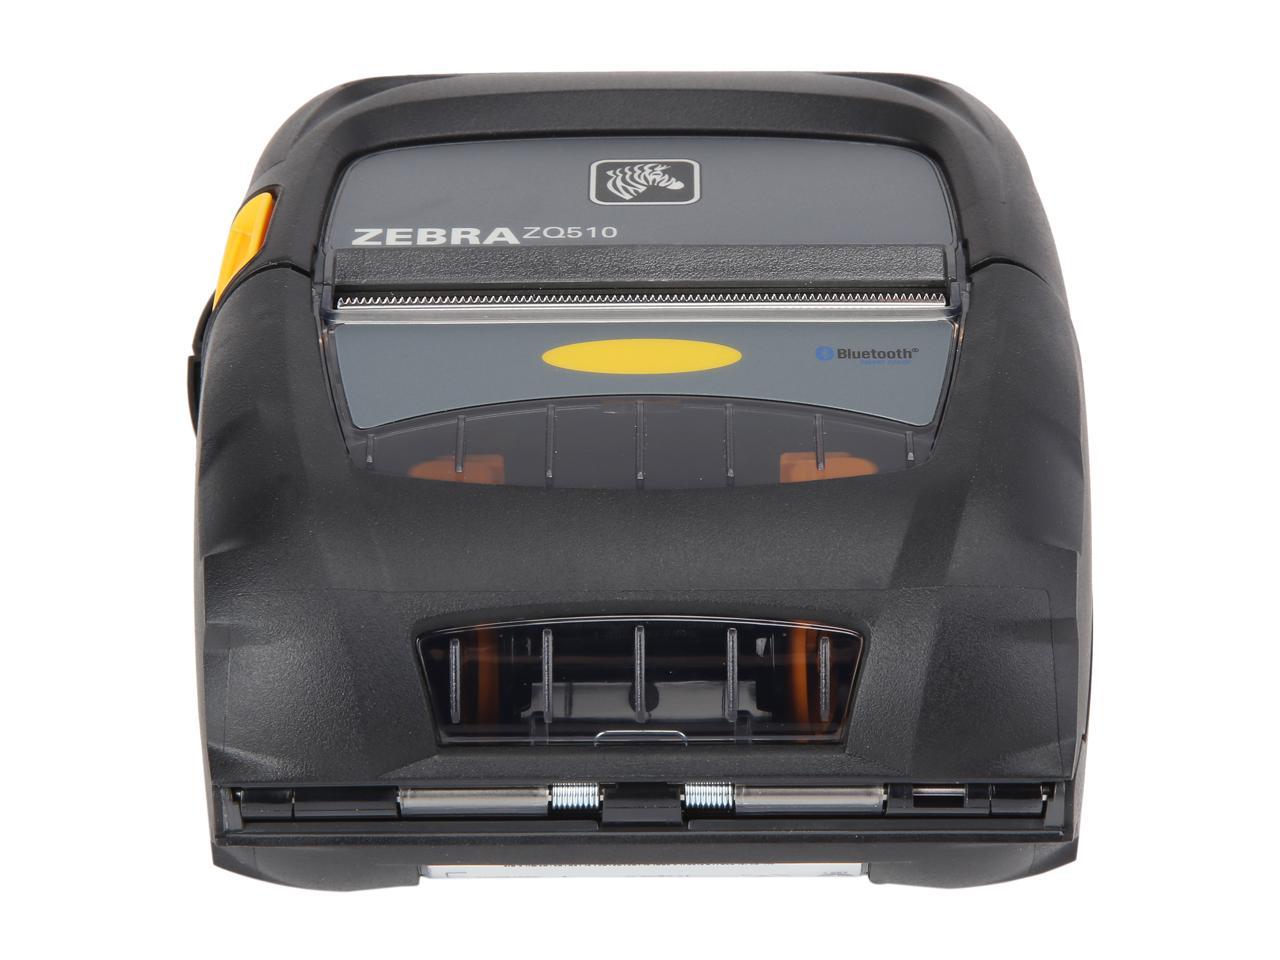 Zebra Zq510 3 Mobile Direct Thermal Receipt And Label Printer 203 Dpi Bluetooth 40 Linered 9217